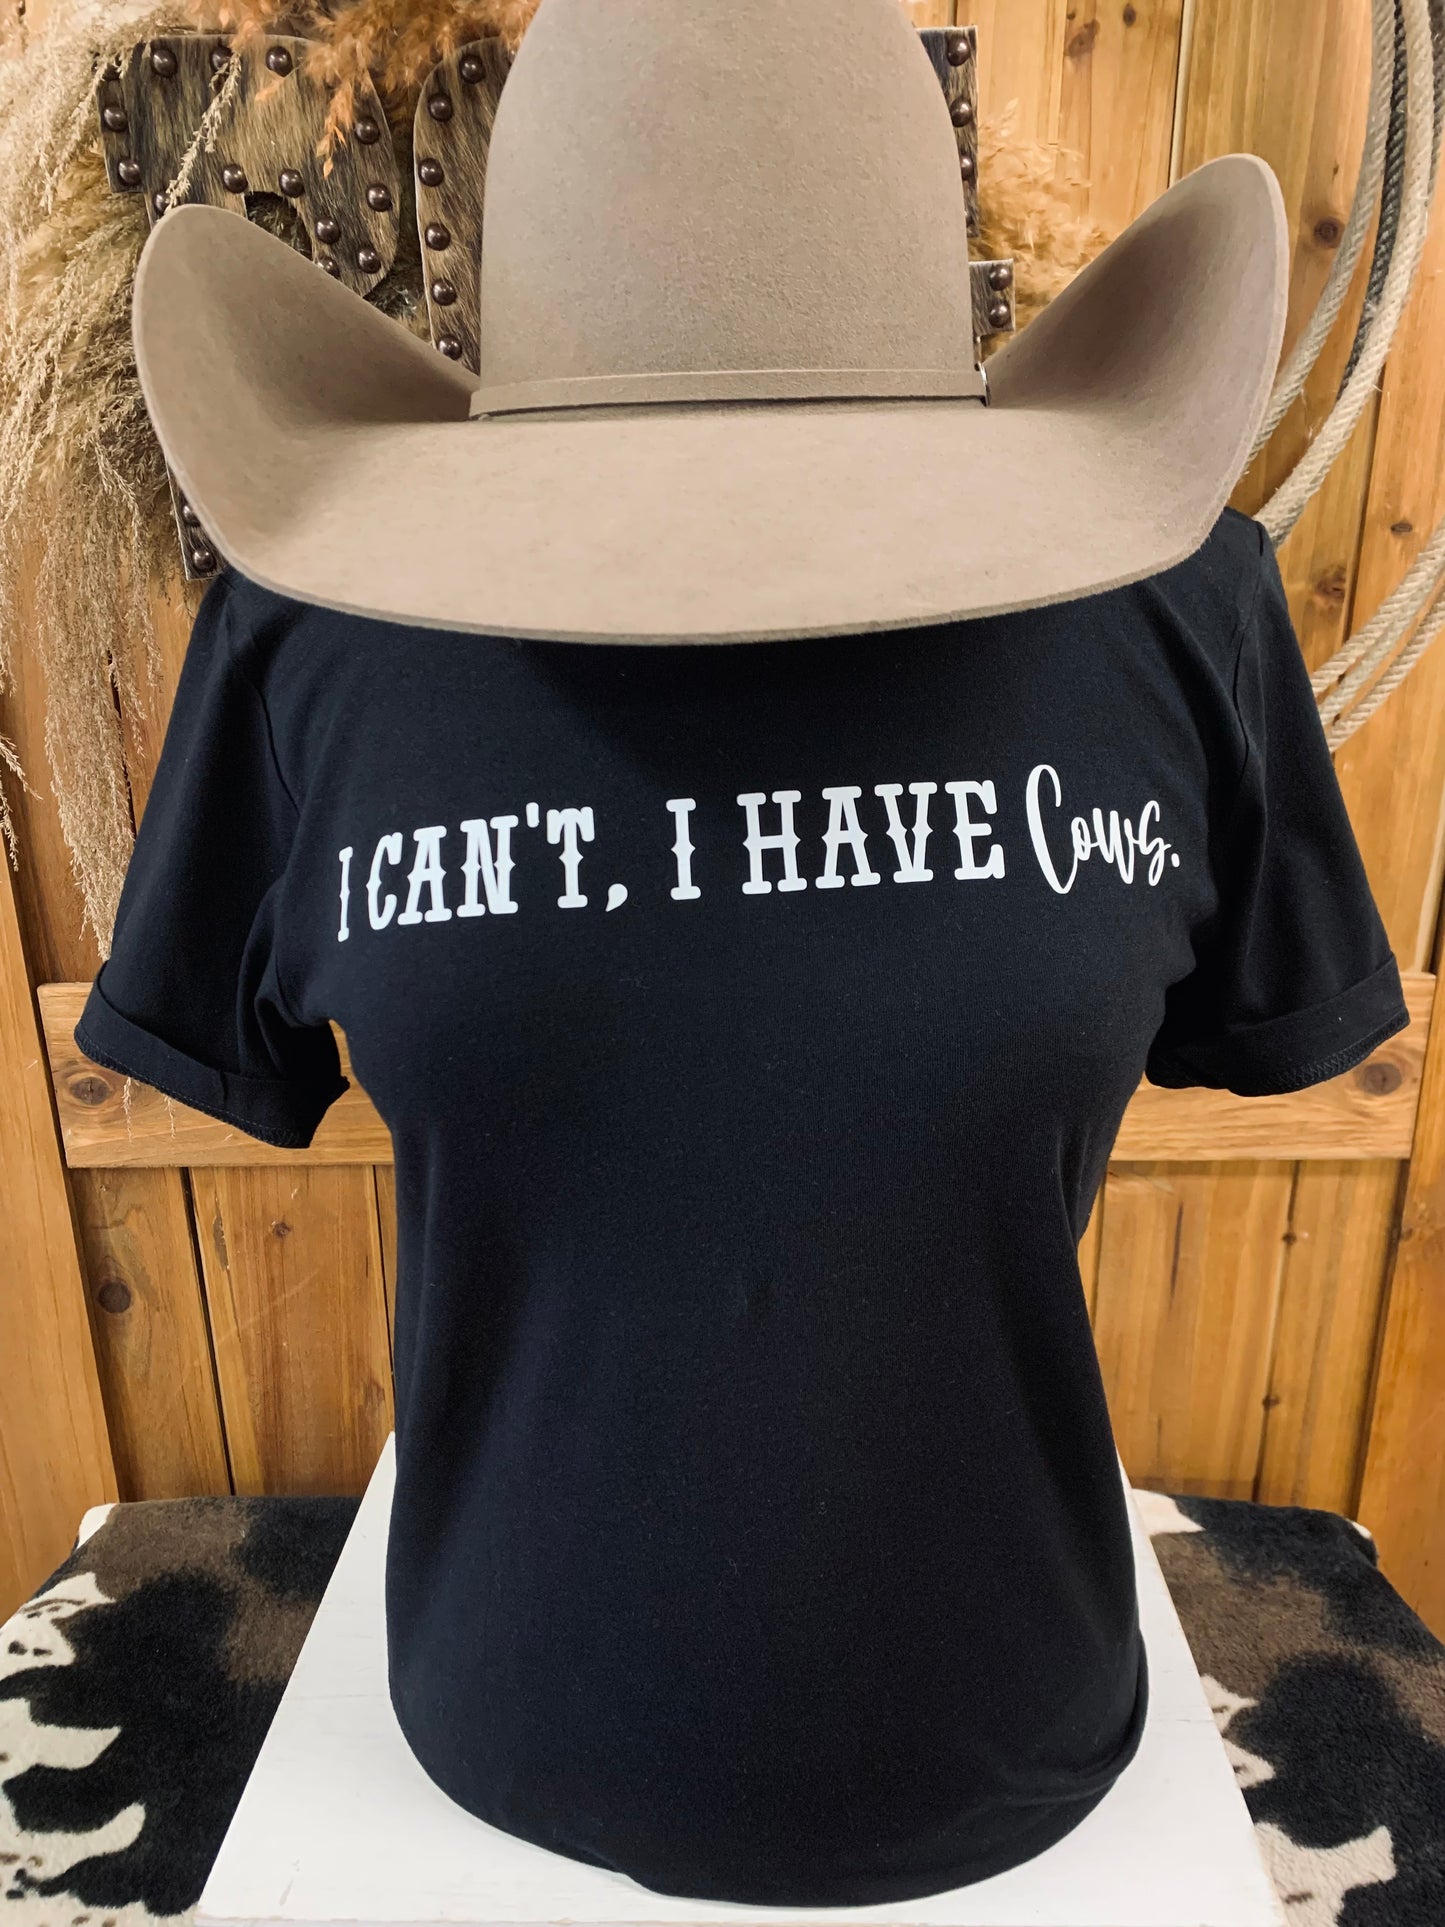 “I can’t, I have Cows.” Tee